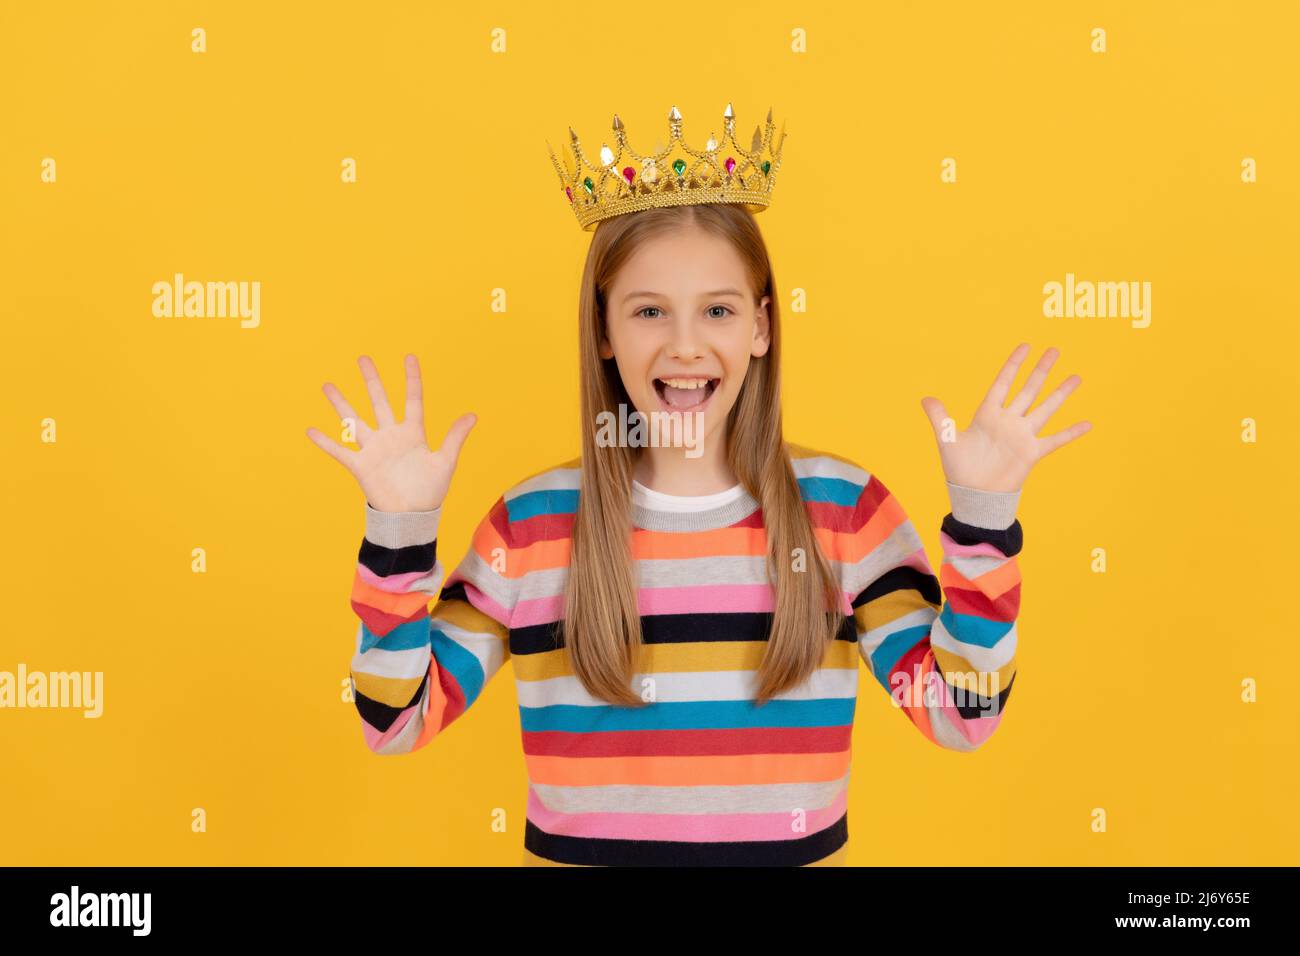 glad teen child in queen crown on yellow background Stock Photo